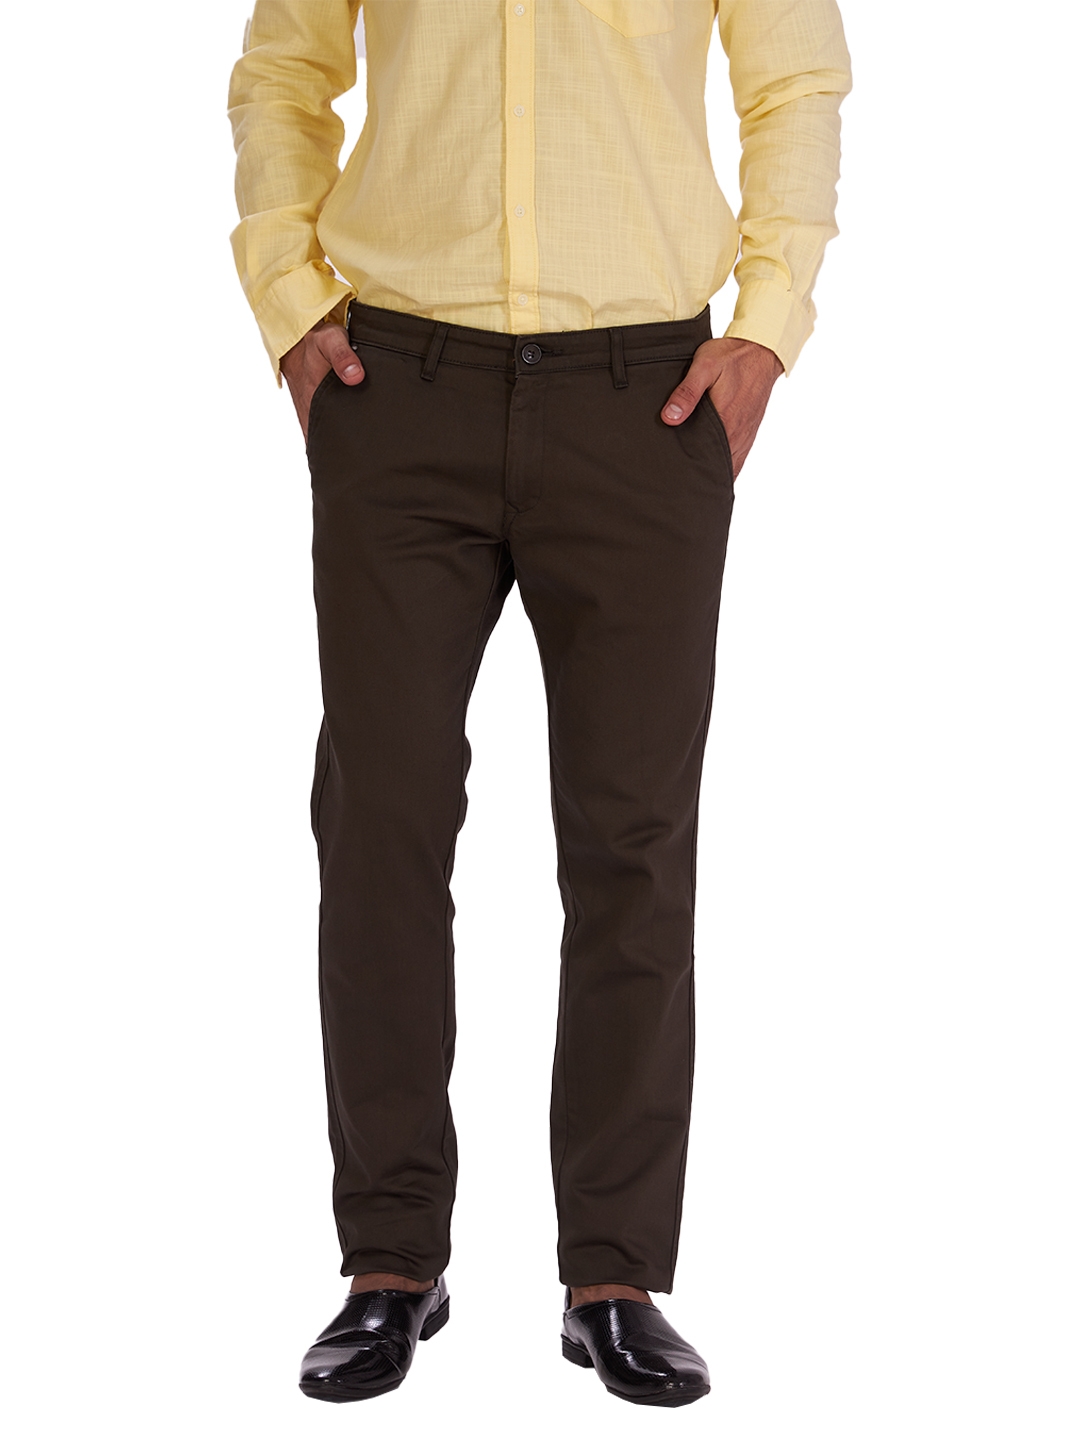 D'cot by Donear | D'cot by Donear Men's Brown Cotton Trousers 0